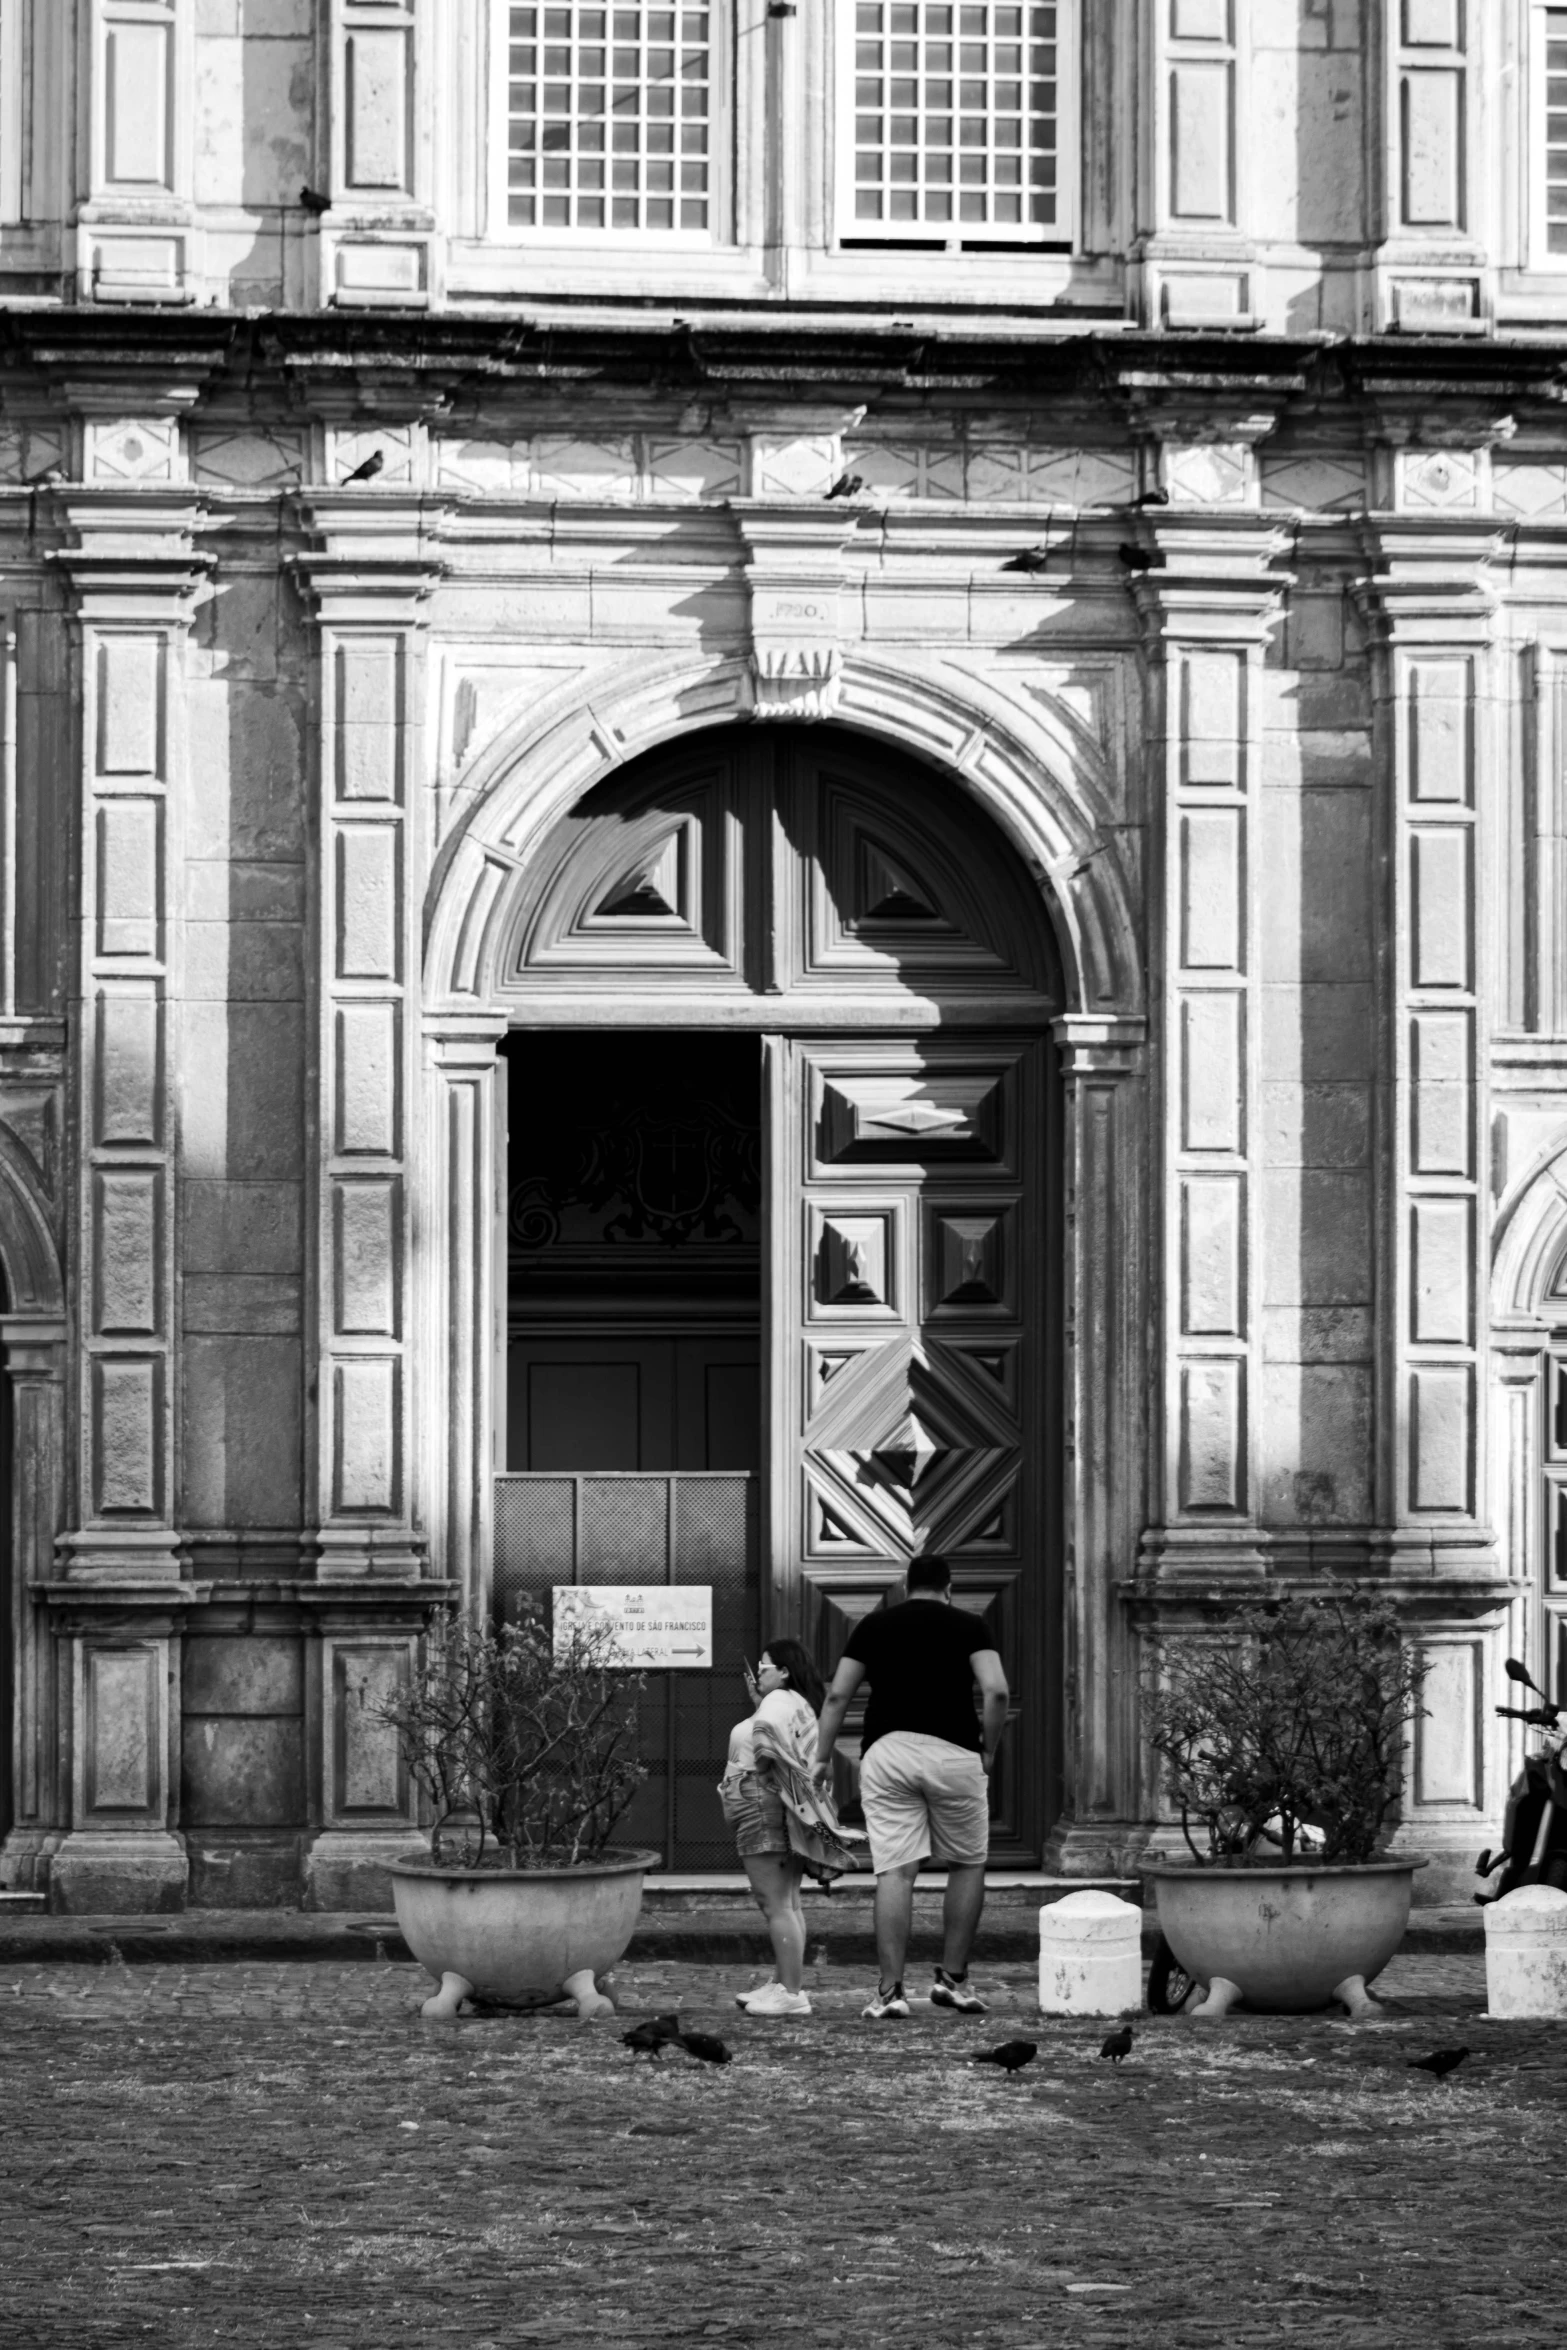 a black and white image of a group of people outside a building